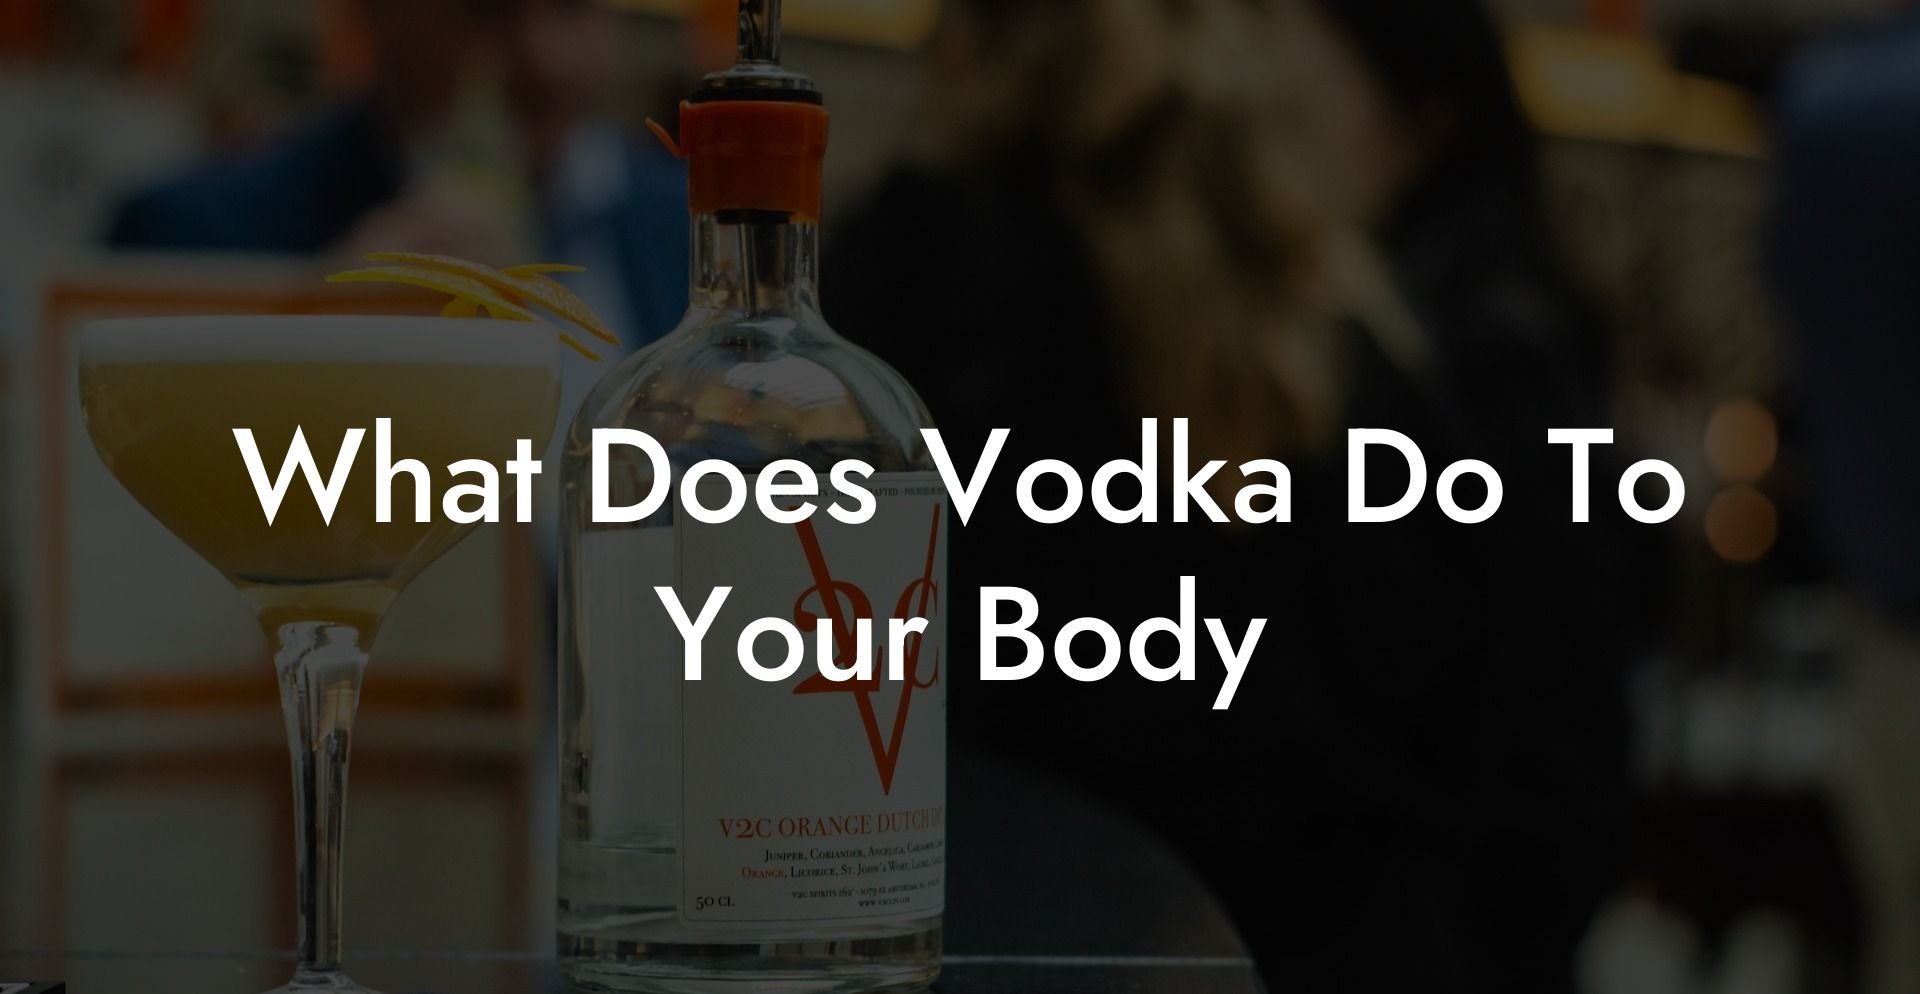 What Does Vodka Do To Your Body